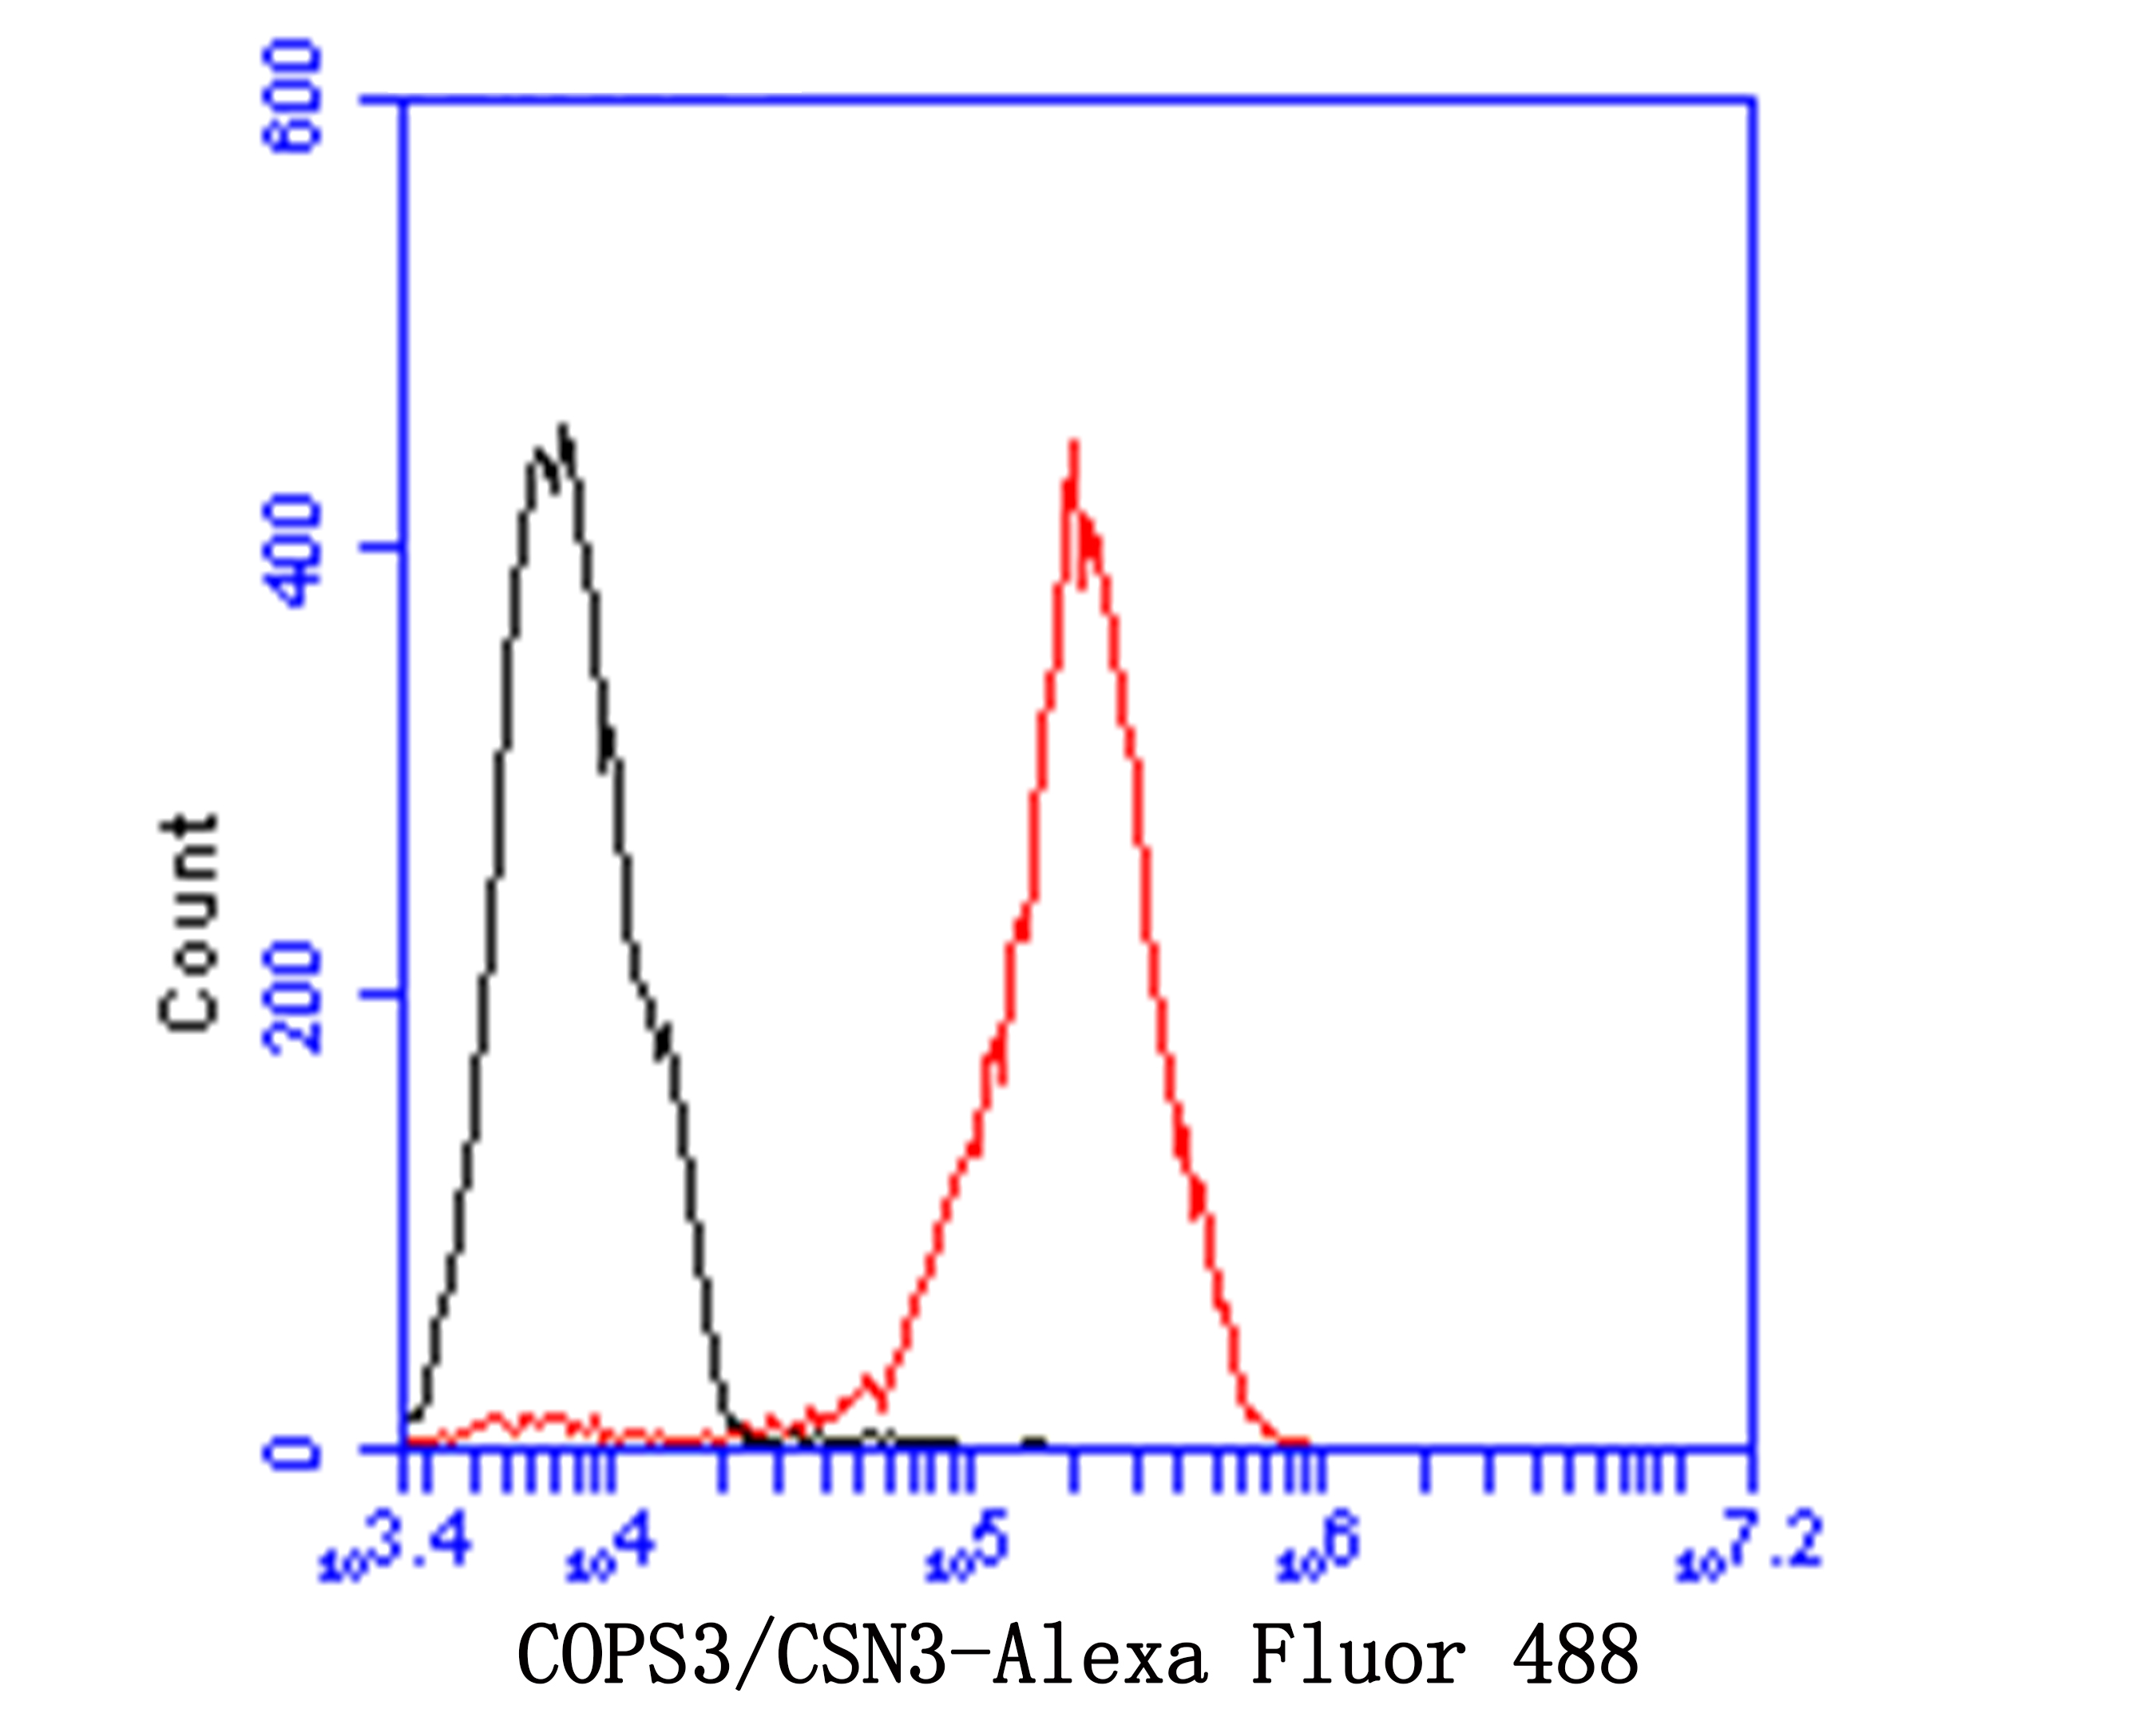 Flow cytometric analysis of COPS3/CSN3 was done on 293 cells. The cells were fixed, permeabilized and stained with the primary antibody (ET7109-60, 1/100) (red). After incubation of the primary antibody at room temperature for an hour, the cells were stained with a Alexa Fluor 488-conjugated goat anti-rabbit IgG Secondary antibody at 1/500 dilution for 30 minutes.Unlabelled sample was used as a control (cells without incubation with primary antibody; black).